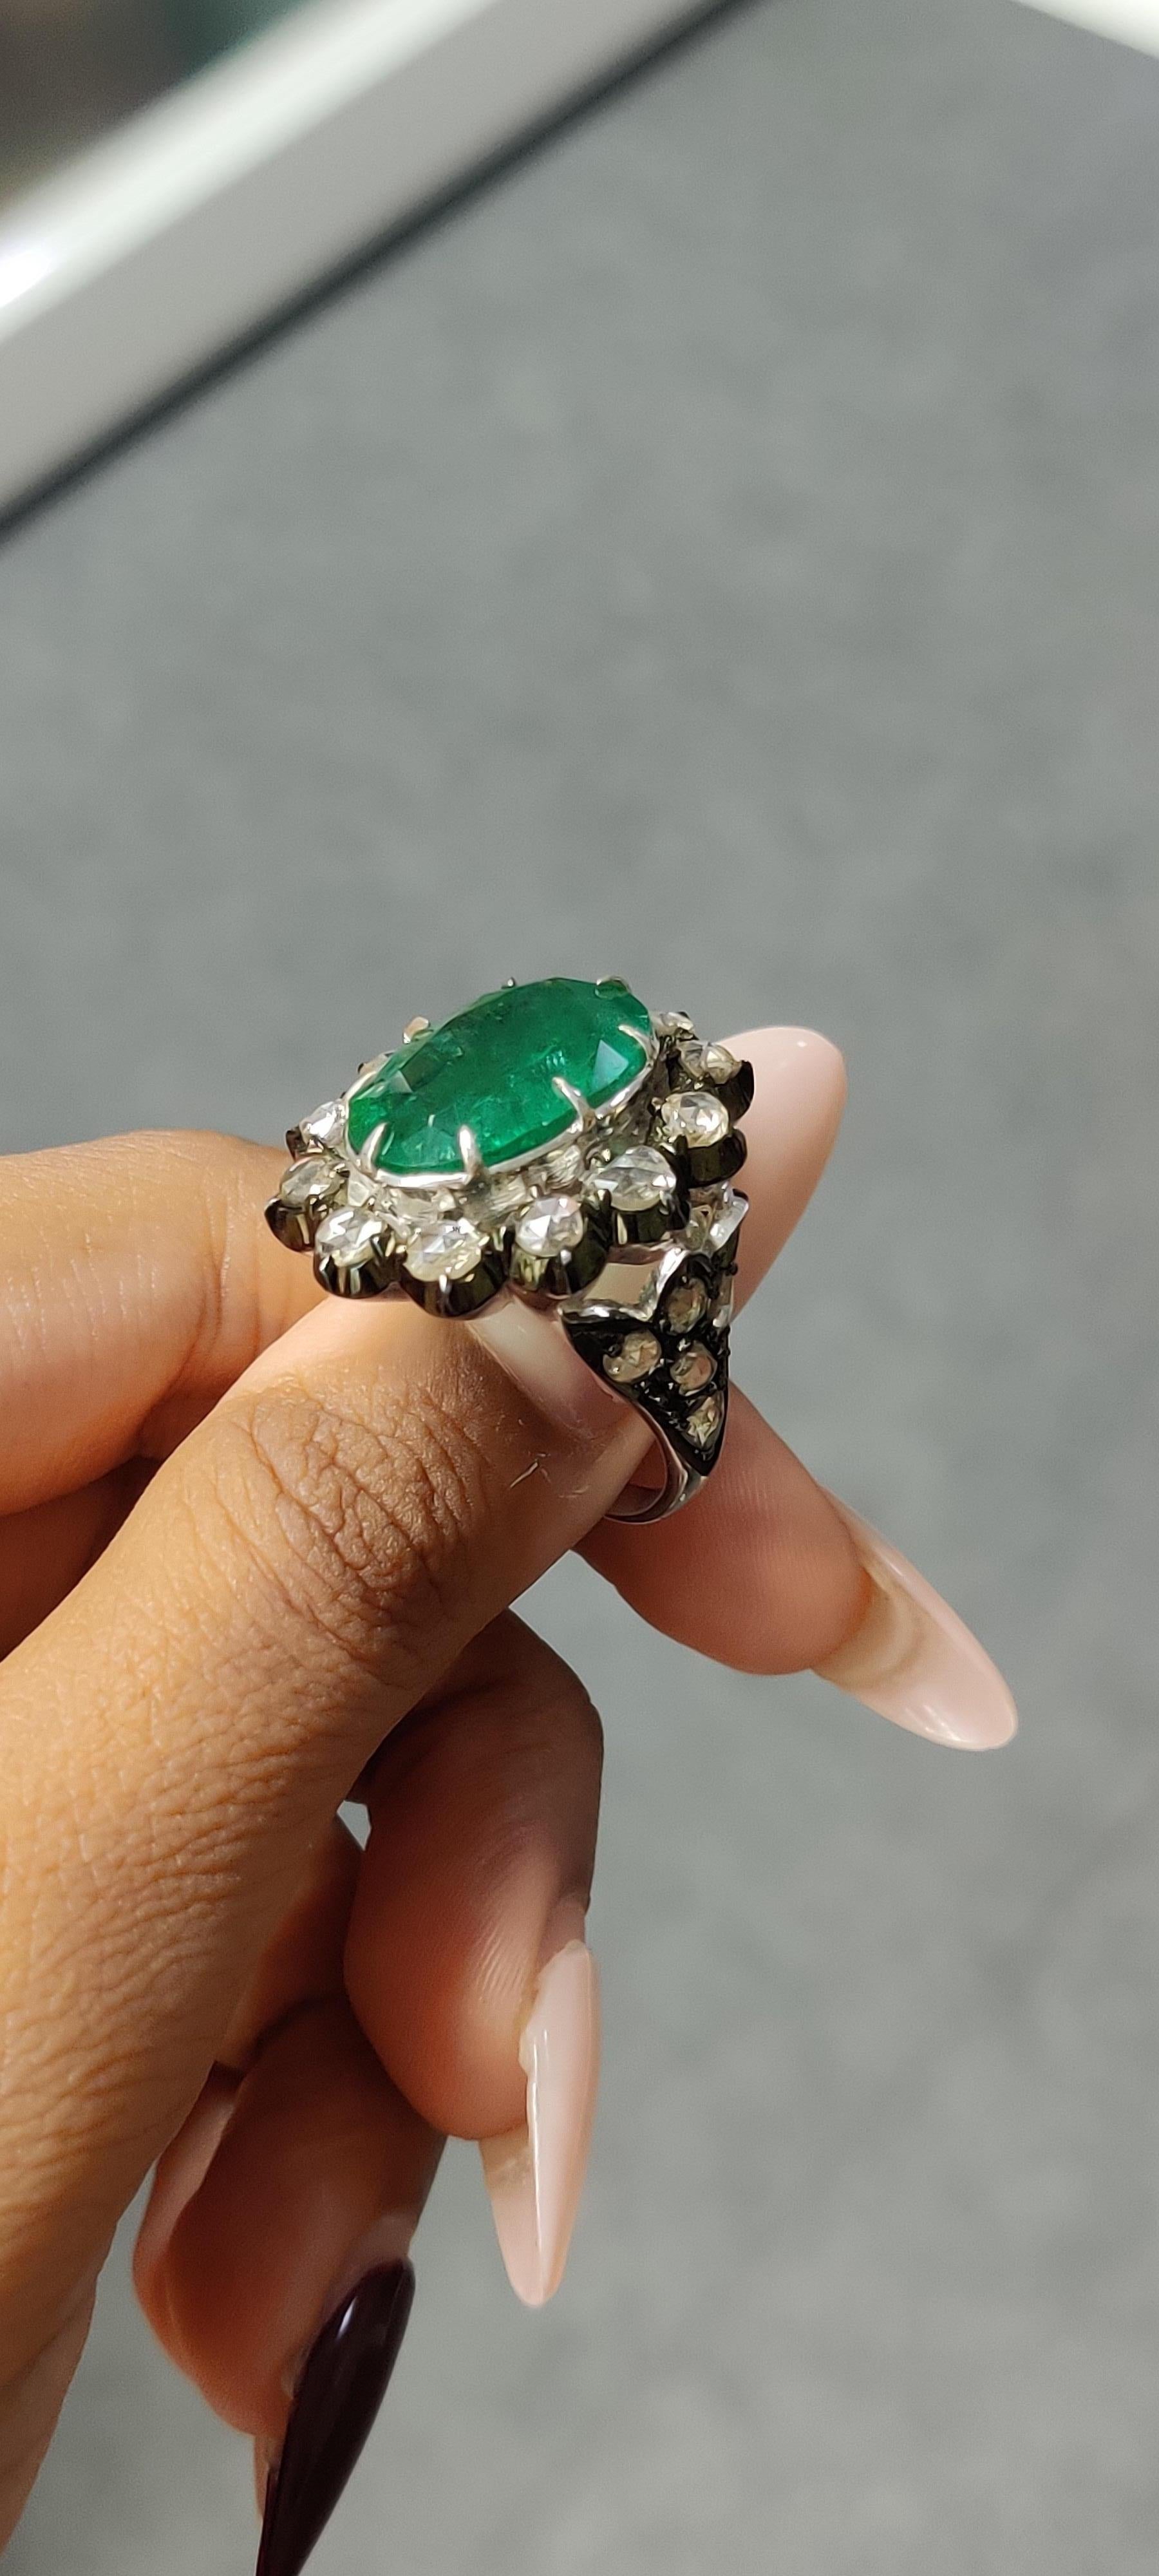  8.9 Ct Zambian Emerald Art Deco Ring with Rose Cut Diamonds in 14K White Gold For Sale 8